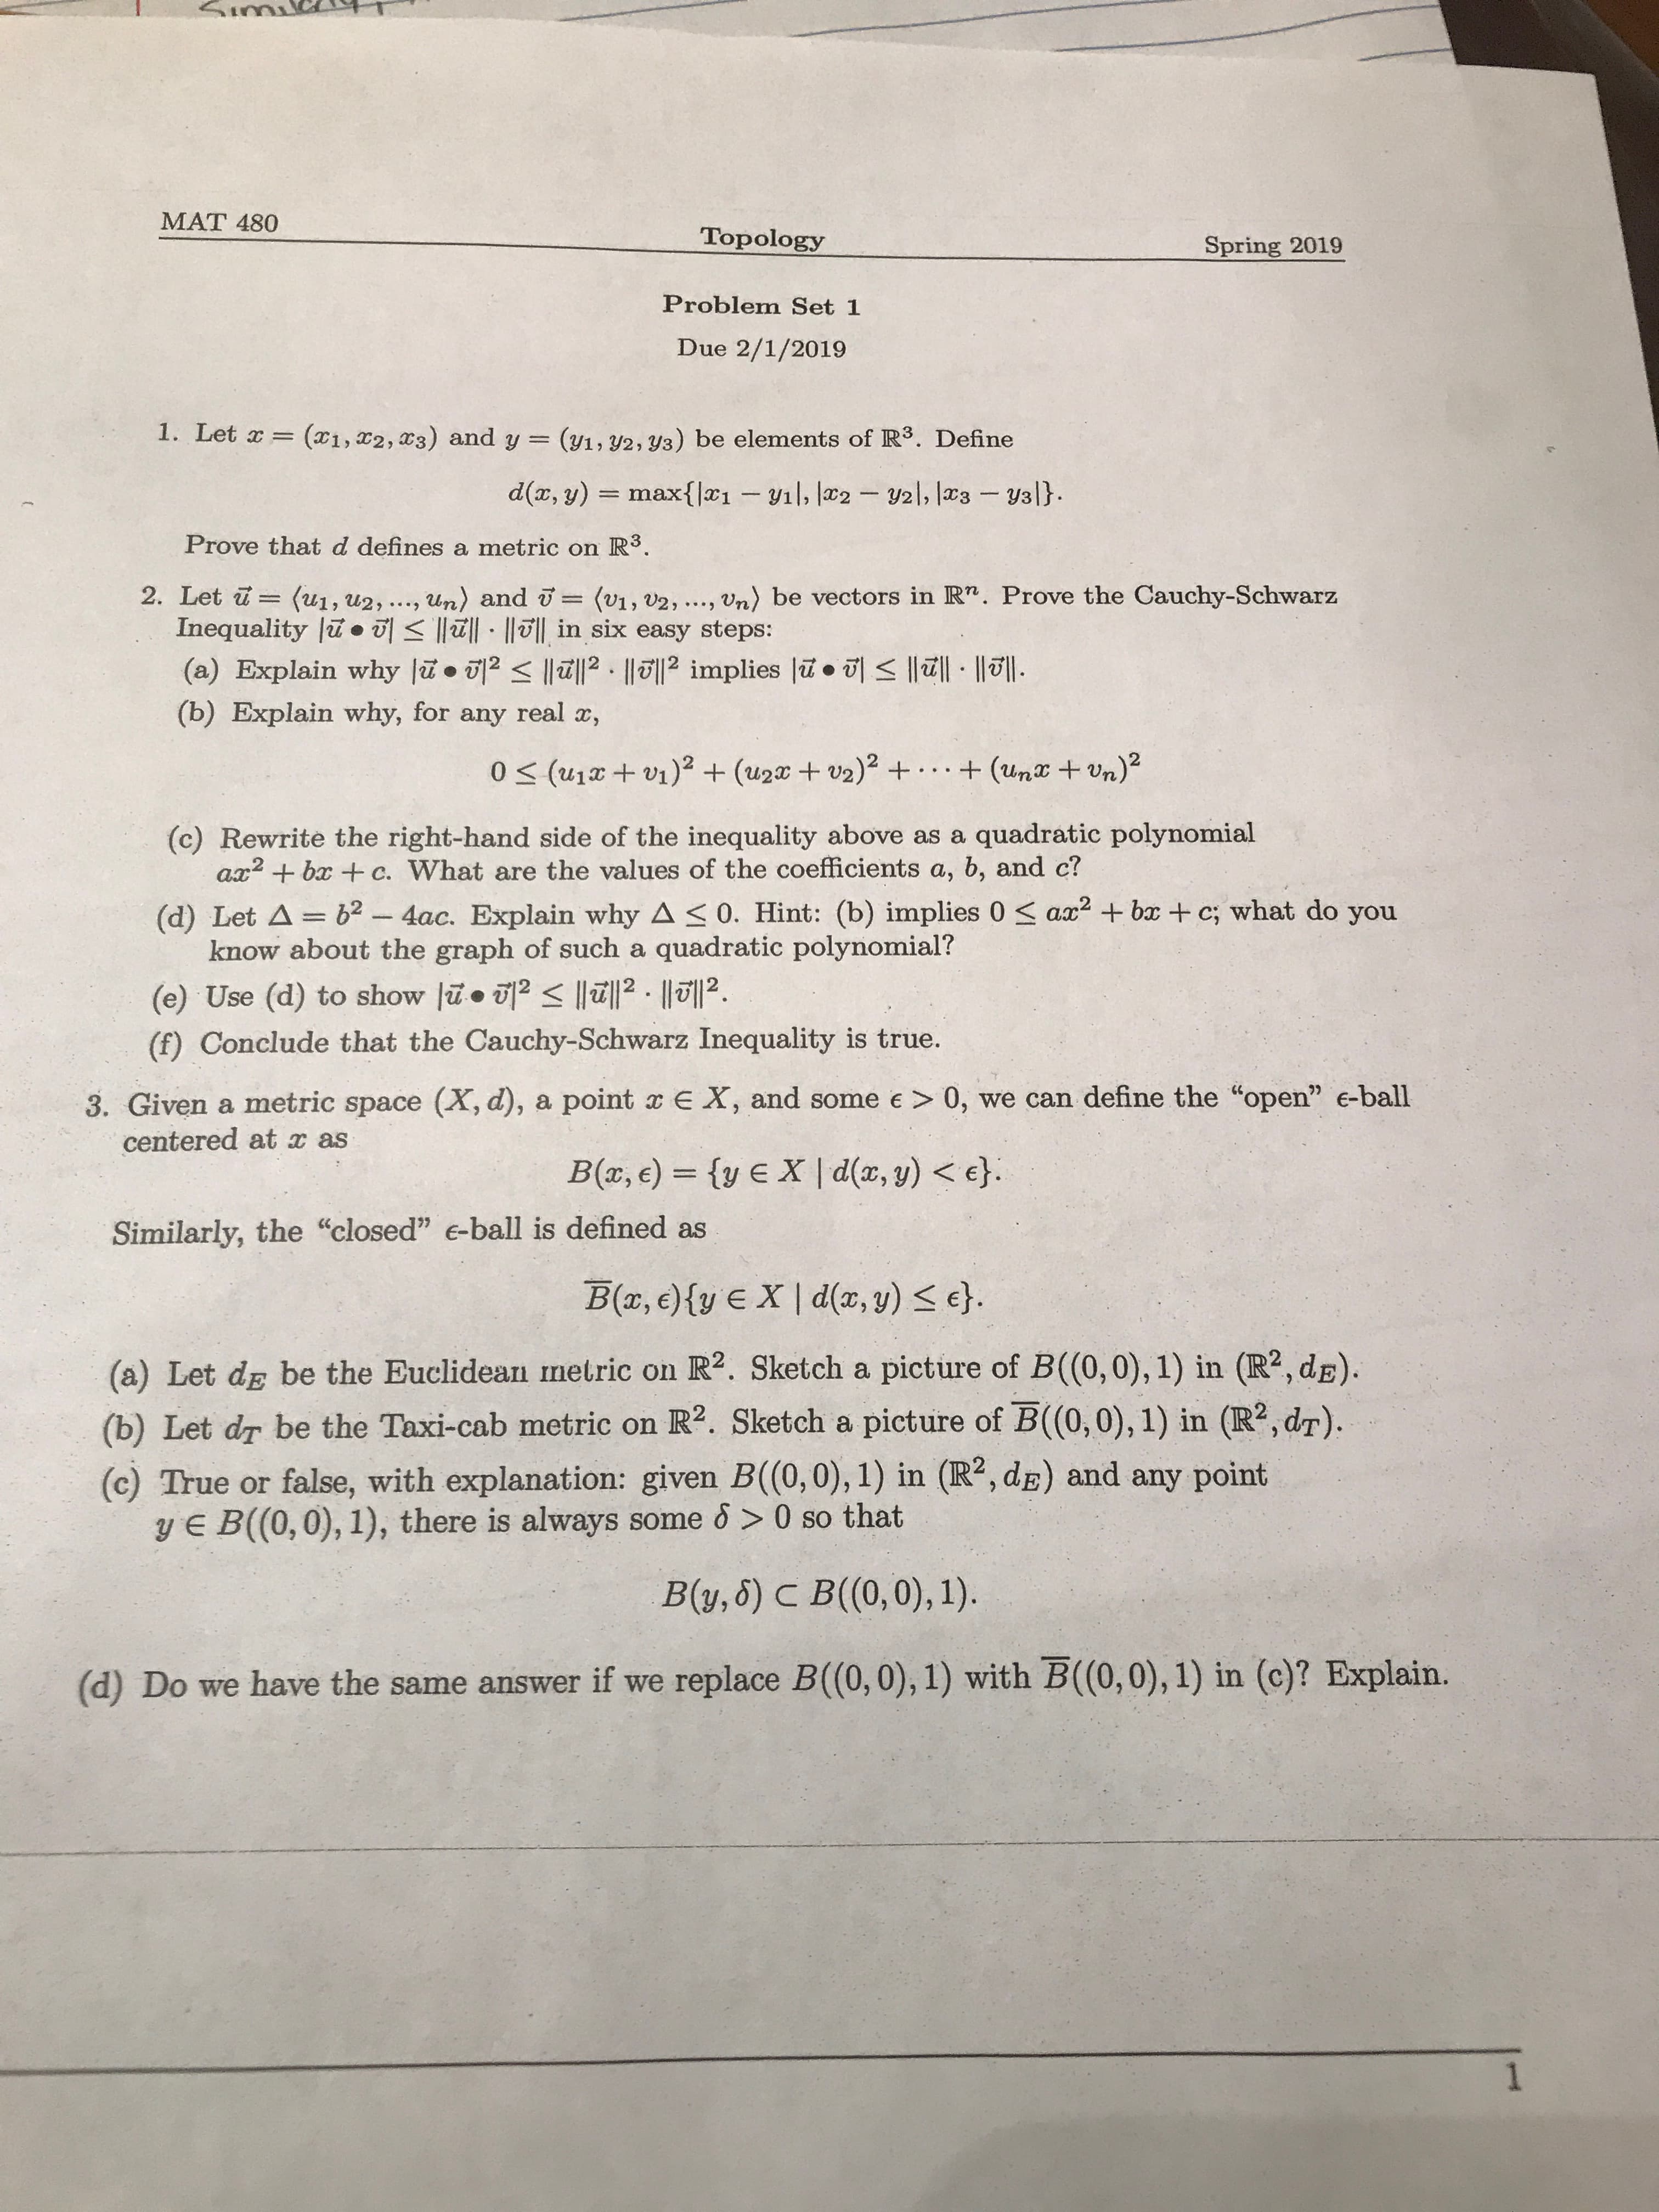 MAT 480
Topology
Problem Set 1
Due 2/1/2019
Spring 2019
1. Let a (x1, z2, 23) and y - (1, 2, va) be elements of R3. Define
d(x,y) = maxlx1-vil, la 2-U21, las-val).
Prove that d defines a metric on R3
2. Let u(u1, u2, ..., un) and - (v, V2, ..., Vn) be vectors in Rn. Prove the Cauchy-Schwarz
Inequality lin 히 lizil . Ilull in six easy steps:
(a) Explain why lu.卵く间2·间2 implies lu. 히
(b) Explain why, for any real z,
阅·间.
(c) Rewrite the right-hand side of the inequality above as a quadratic polynomial
az2 + baz + c. What are the values of the coefficients a, b, and c?
(d) Let A-b2 4ac. Explain why A s 0. Hint: (b) implies 0 az2 ba + c; what do you
know about the graph of such a quadratic polynomial'?
(e) Use (d) to show lž.2I2. l12
(f) Conclude that the Cauchy-Schwarz Inequality is true.
3. Given a metric space (X, d), a point a E X, and some e> 0, we can define the "open" e-ball
centered at as
Similarly, the "closed" e-ball is defined as
B(r, e)(v E 지 d(x, y)
e).
(a) Let de be the Euclidean metric on R2. Sketch a picture of B(0,0), 1) in (R2, dB)
(b) Let dr be the Taxi-cab metric on IR2. Sketch a picture of B((0,0), 1) in (R2, dr).
(c) True or false, with explanation: given B((0,0),1) in (R2, dE) and any point
V E B((0,0), 1), there is always some 6> 0 so that
(d) Do we have the same answer if we replace B(0, 0), 1) with
瓦(0,0), 1) in (c)? Explain.
